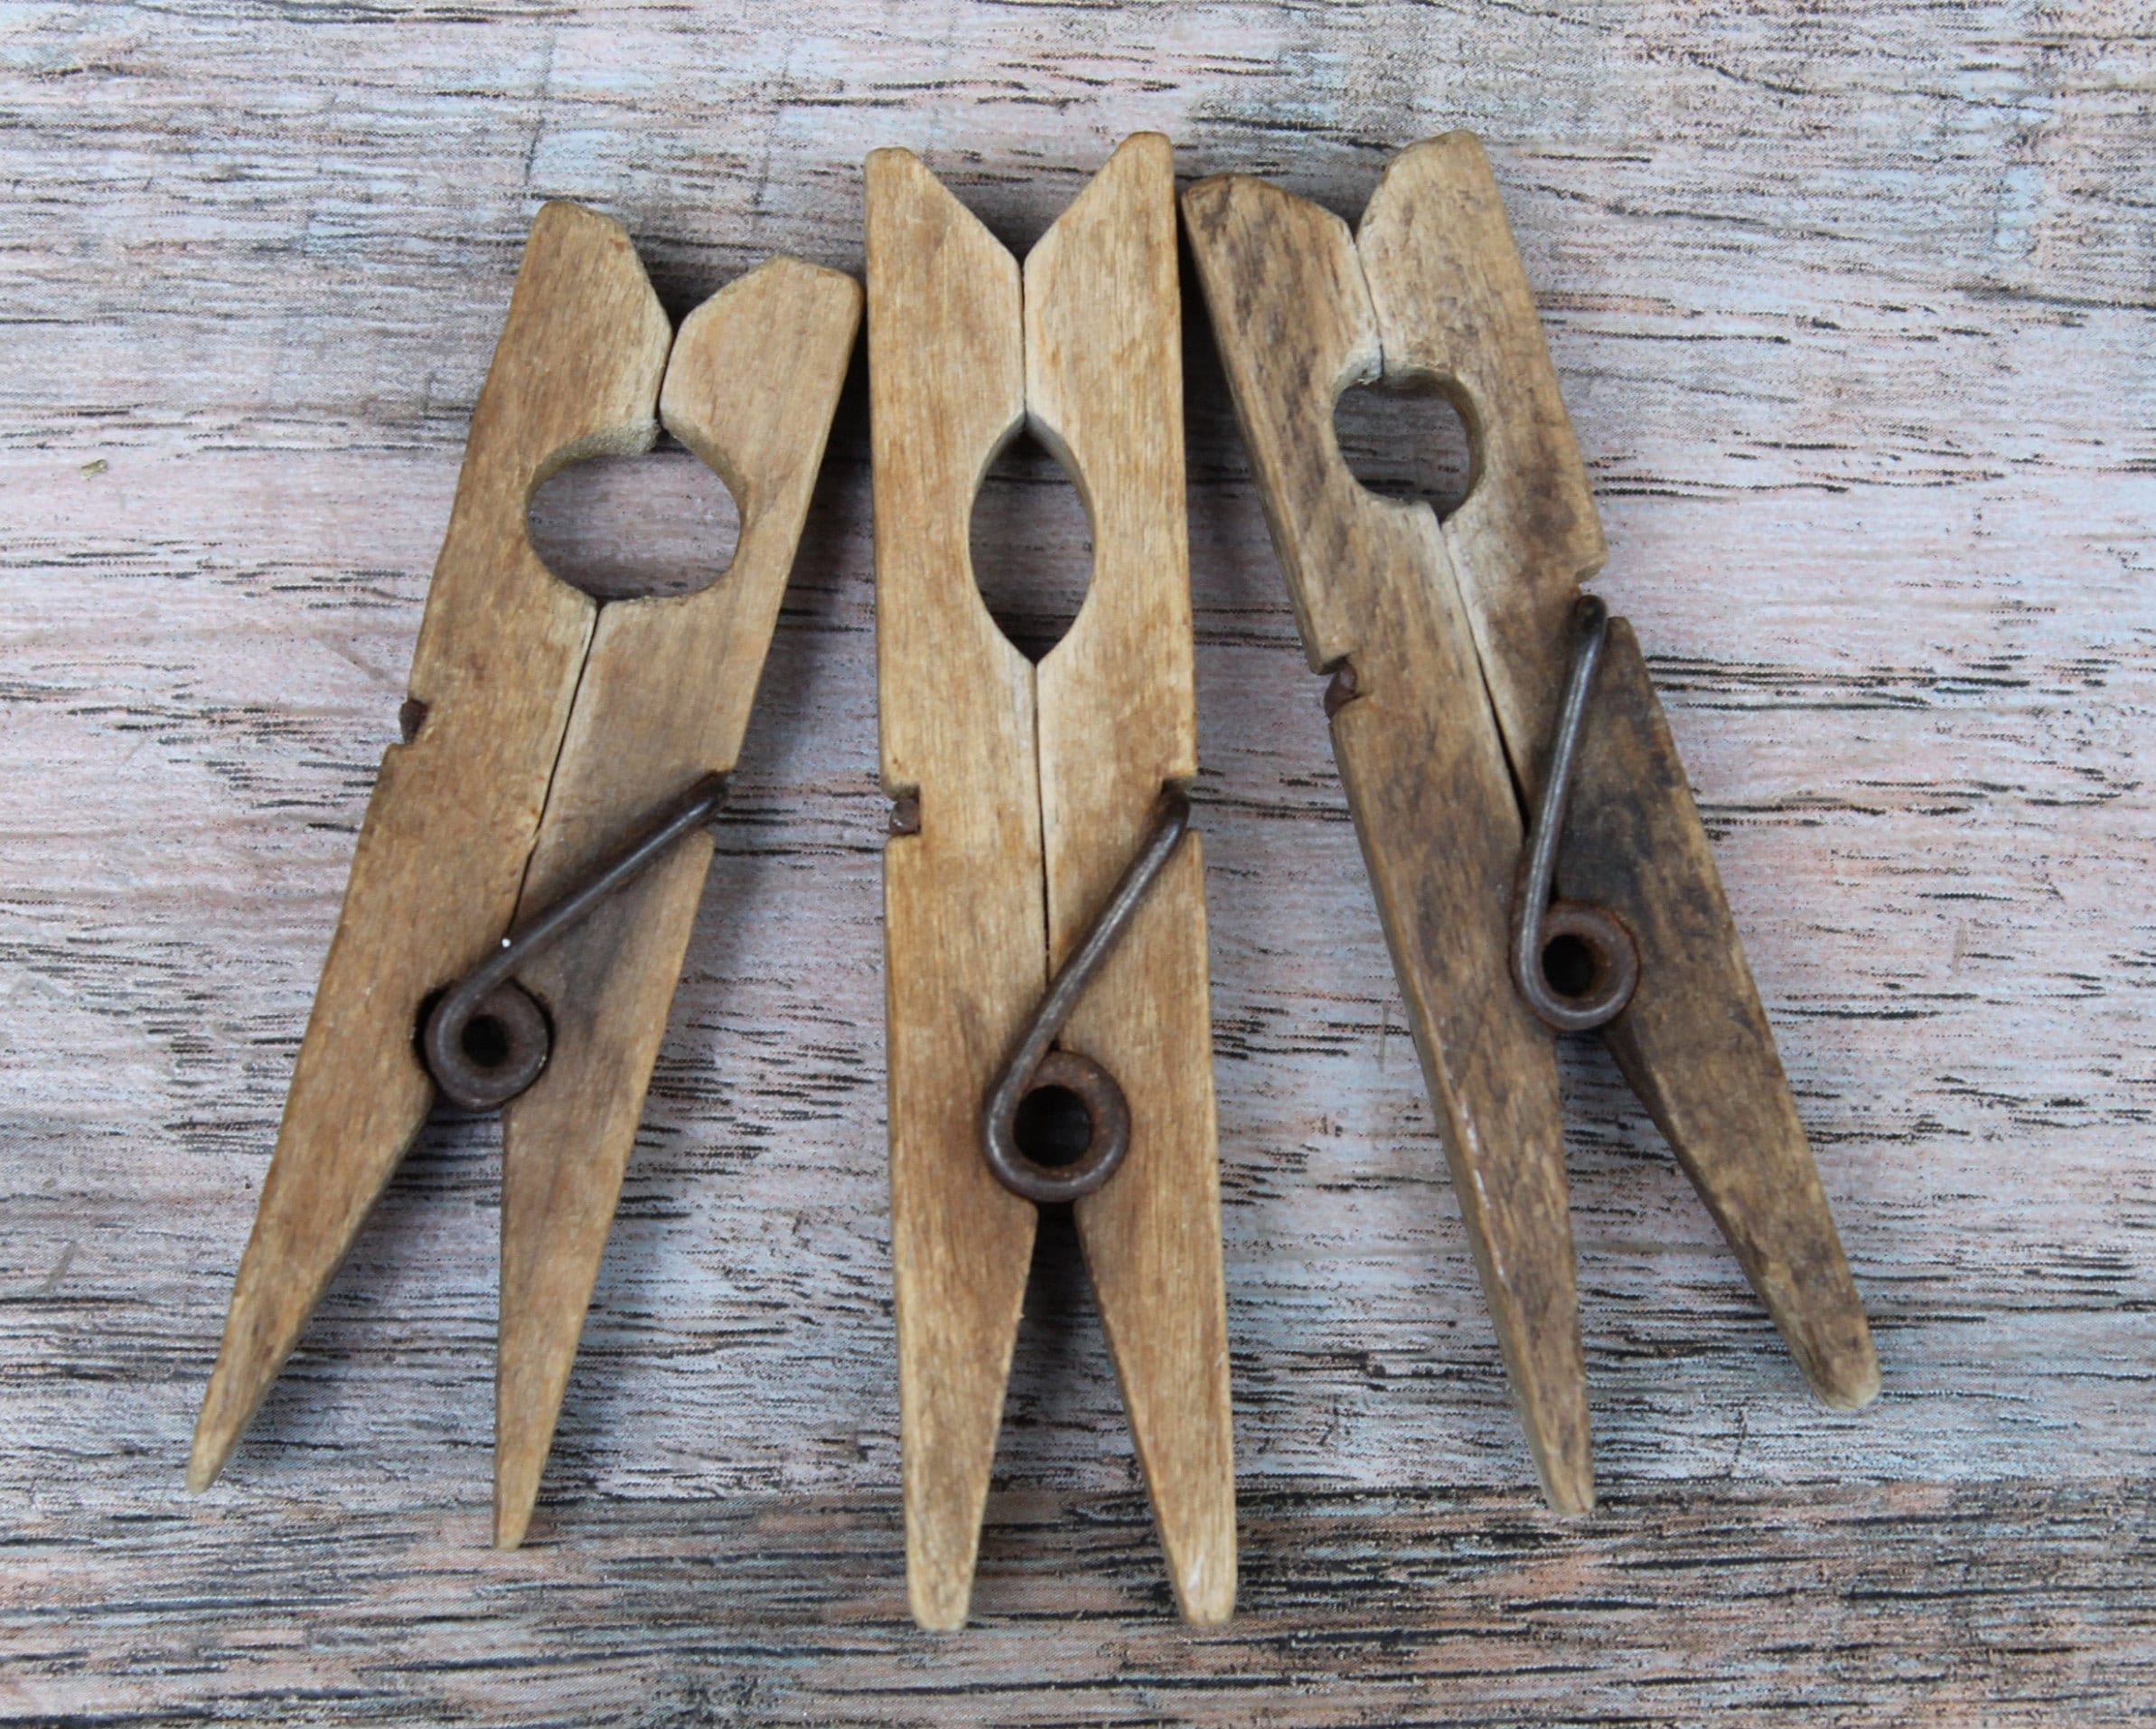 Vintage Wooden Clothes Peg, Wood Clothes Pins for Decor, Clothespins Towel  Holder, Vintage Clothes, Antique Wood Clothespins Made in USSR. 